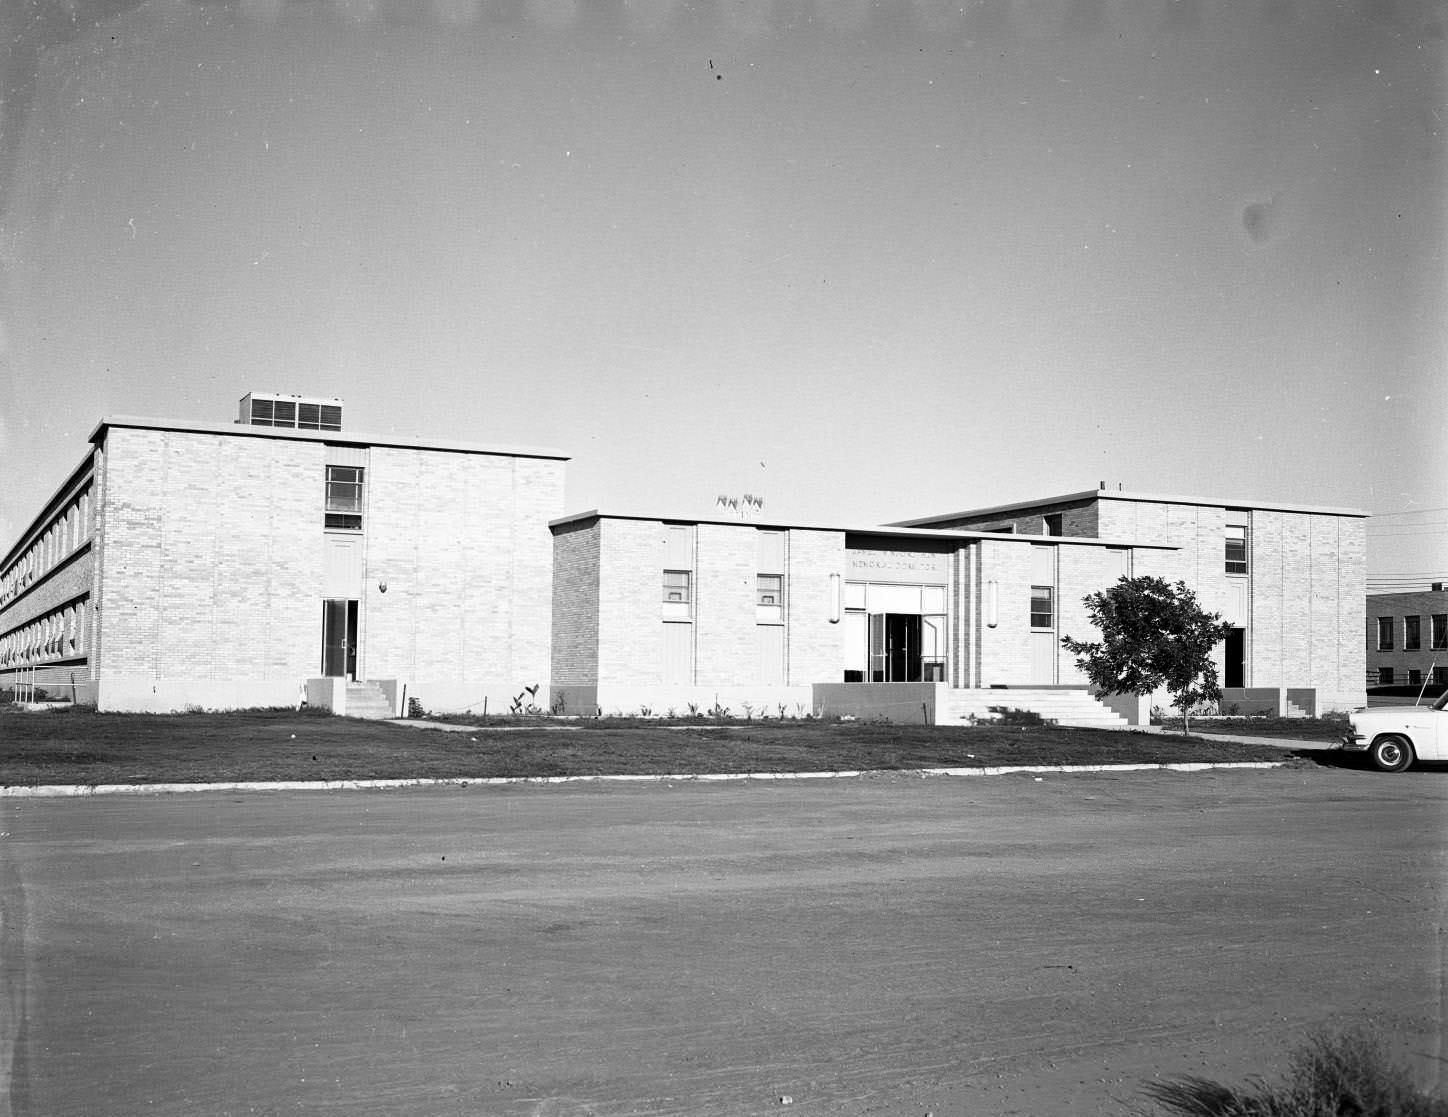 An exterior view of the McMurry College dorms, 1959